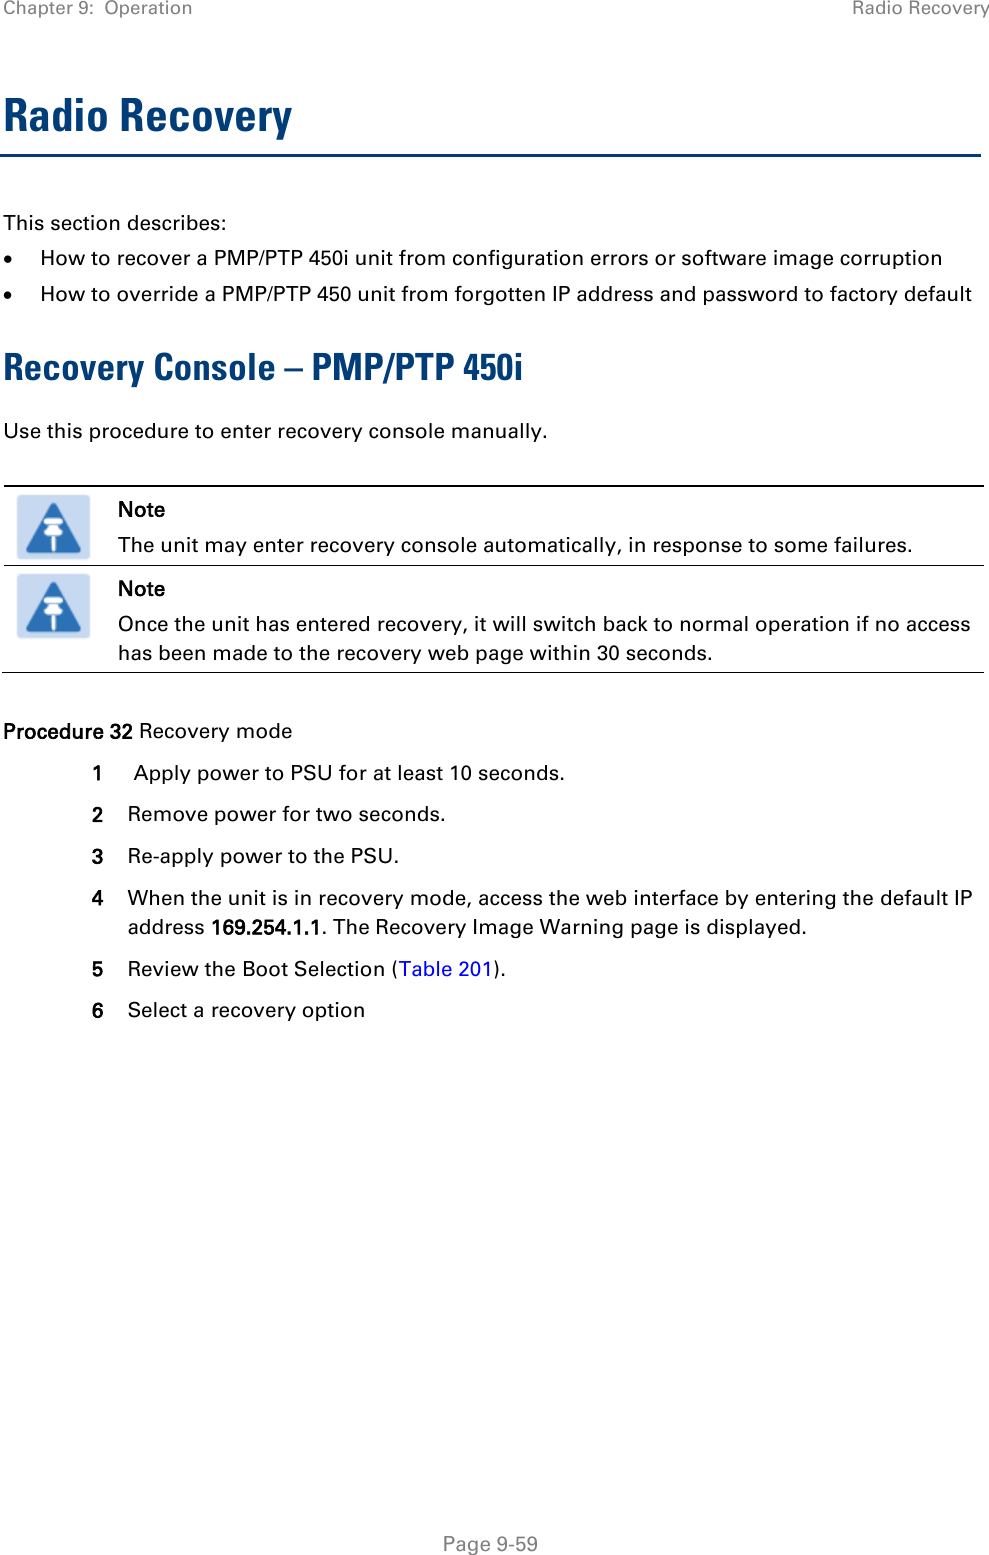 Chapter 9:  Operation Radio Recovery   Page 9-59 Radio Recovery  This section describes: • How to recover a PMP/PTP 450i unit from configuration errors or software image corruption • How to override a PMP/PTP 450 unit from forgotten IP address and password to factory default Recovery Console – PMP/PTP 450i Use this procedure to enter recovery console manually.   Note The unit may enter recovery console automatically, in response to some failures.  Note Once the unit has entered recovery, it will switch back to normal operation if no access has been made to the recovery web page within 30 seconds.  Procedure 32 Recovery mode 1  Apply power to PSU for at least 10 seconds. 2 Remove power for two seconds. 3 Re-apply power to the PSU. 4 When the unit is in recovery mode, access the web interface by entering the default IP address 169.254.1.1. The Recovery Image Warning page is displayed. 5 Review the Boot Selection (Table 201). 6 Select a recovery option  